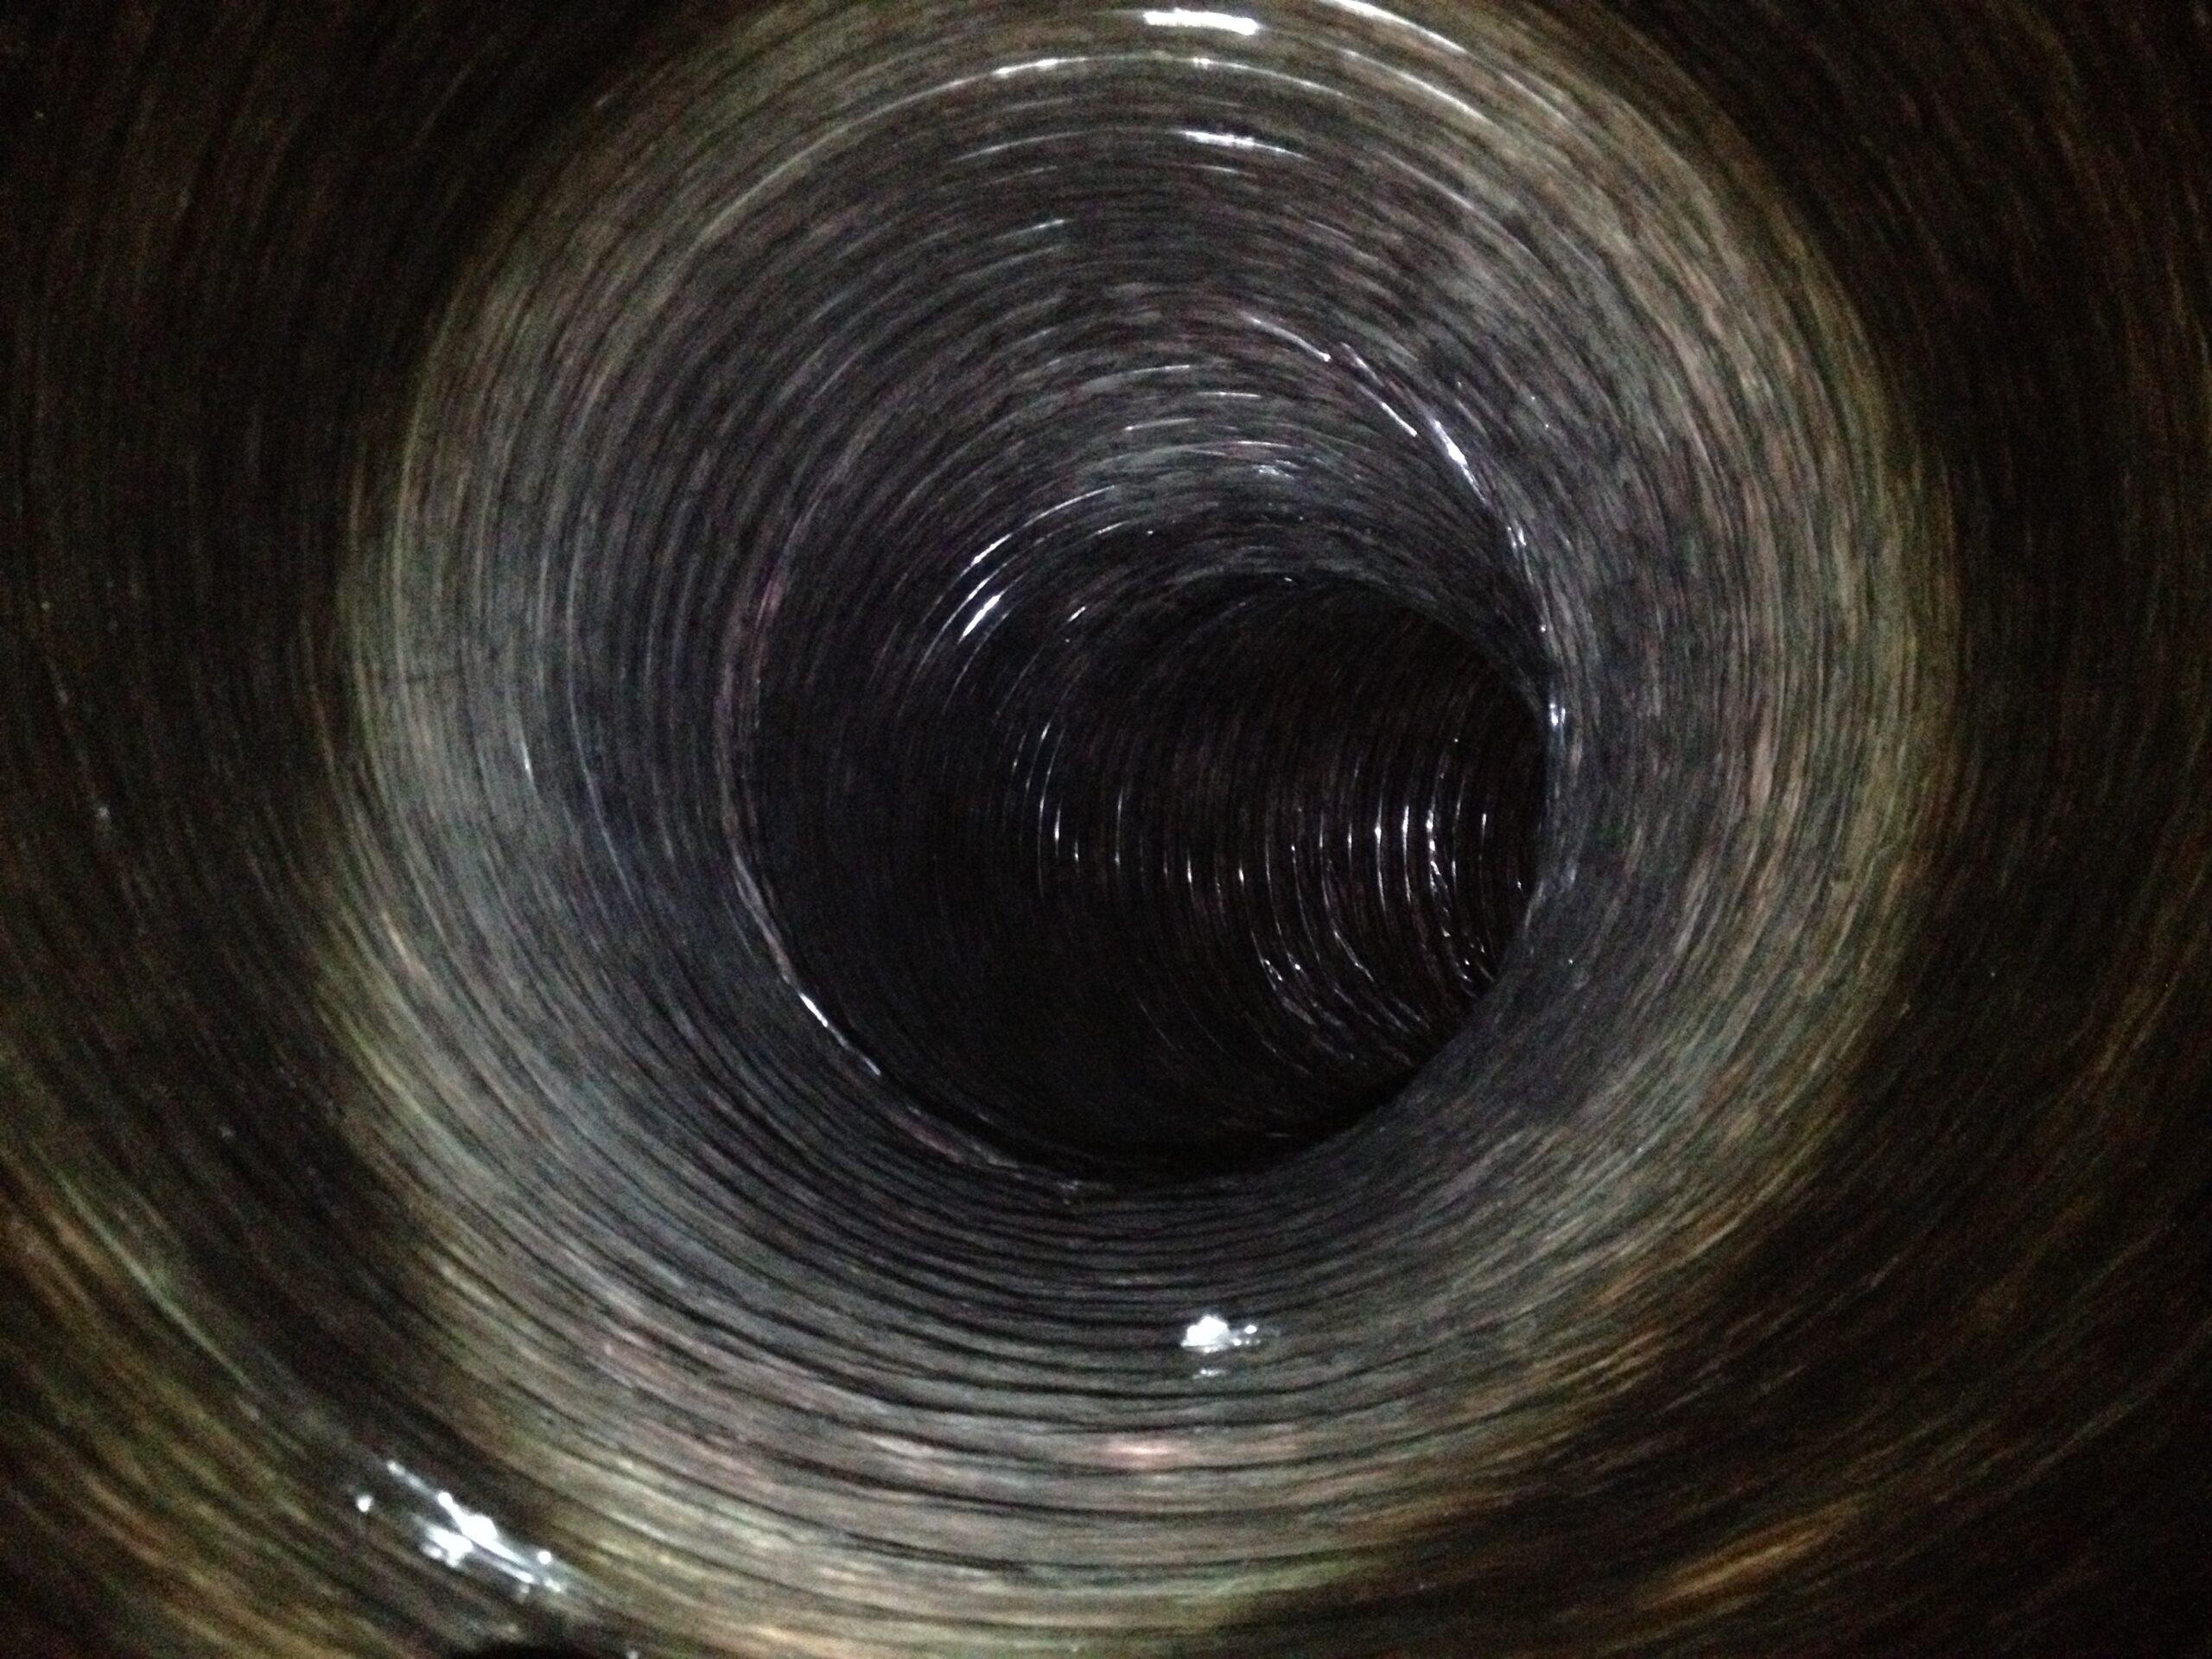 More A/C flex ducting after they have been cleaned by A-1 Duct Cleaning & Chimney Sweep in Orange County, CA